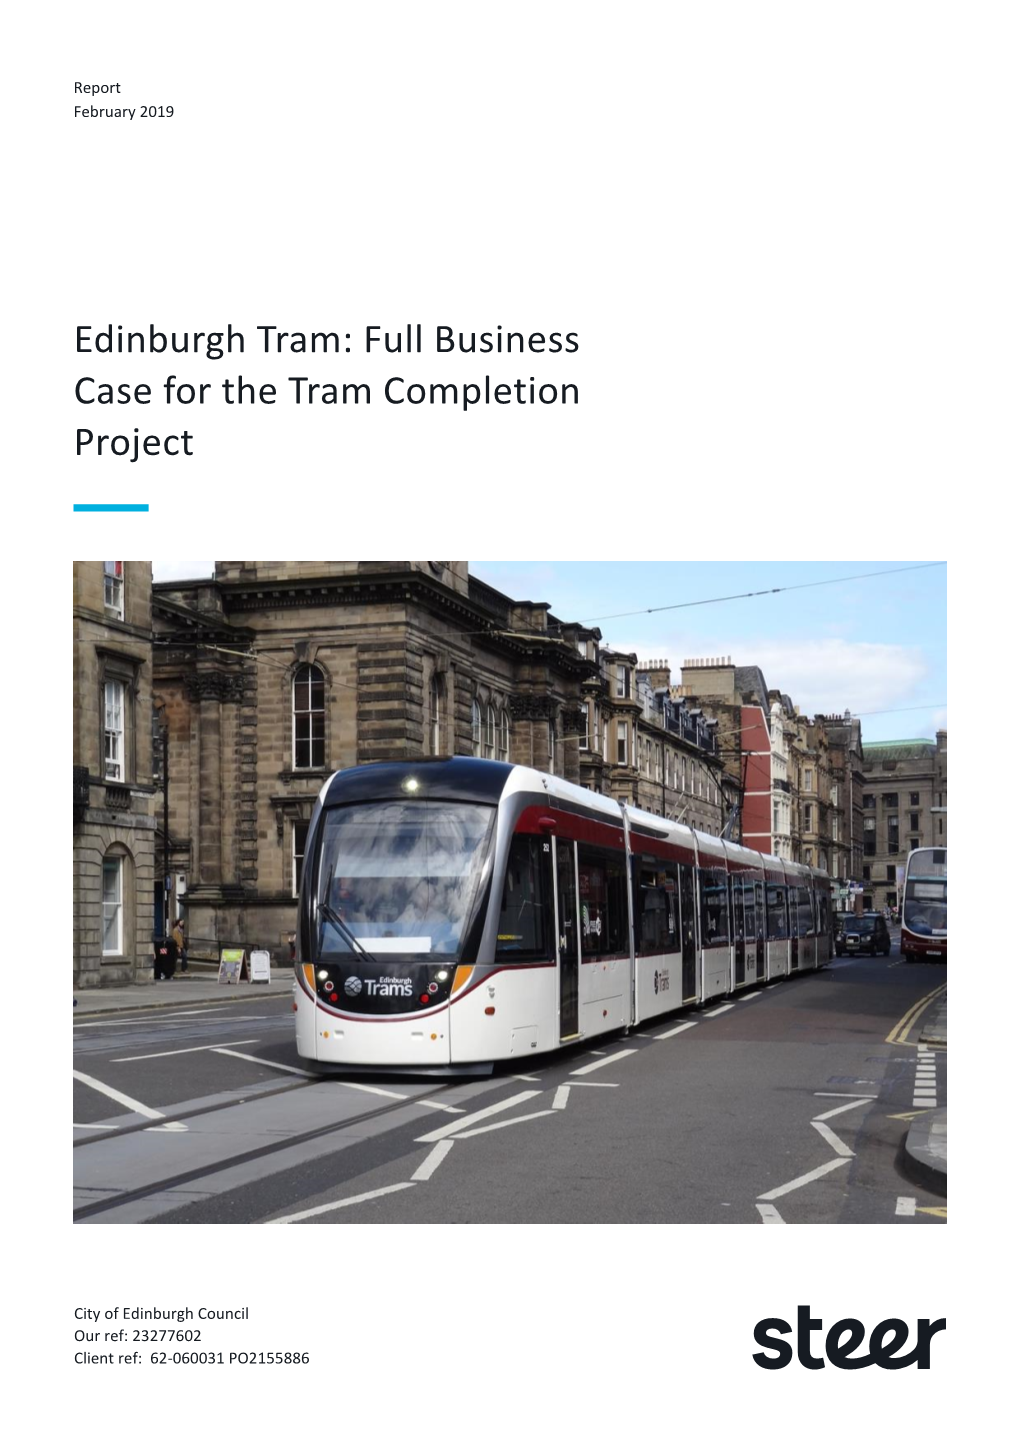 Full Business Case for the Tram Completion Project